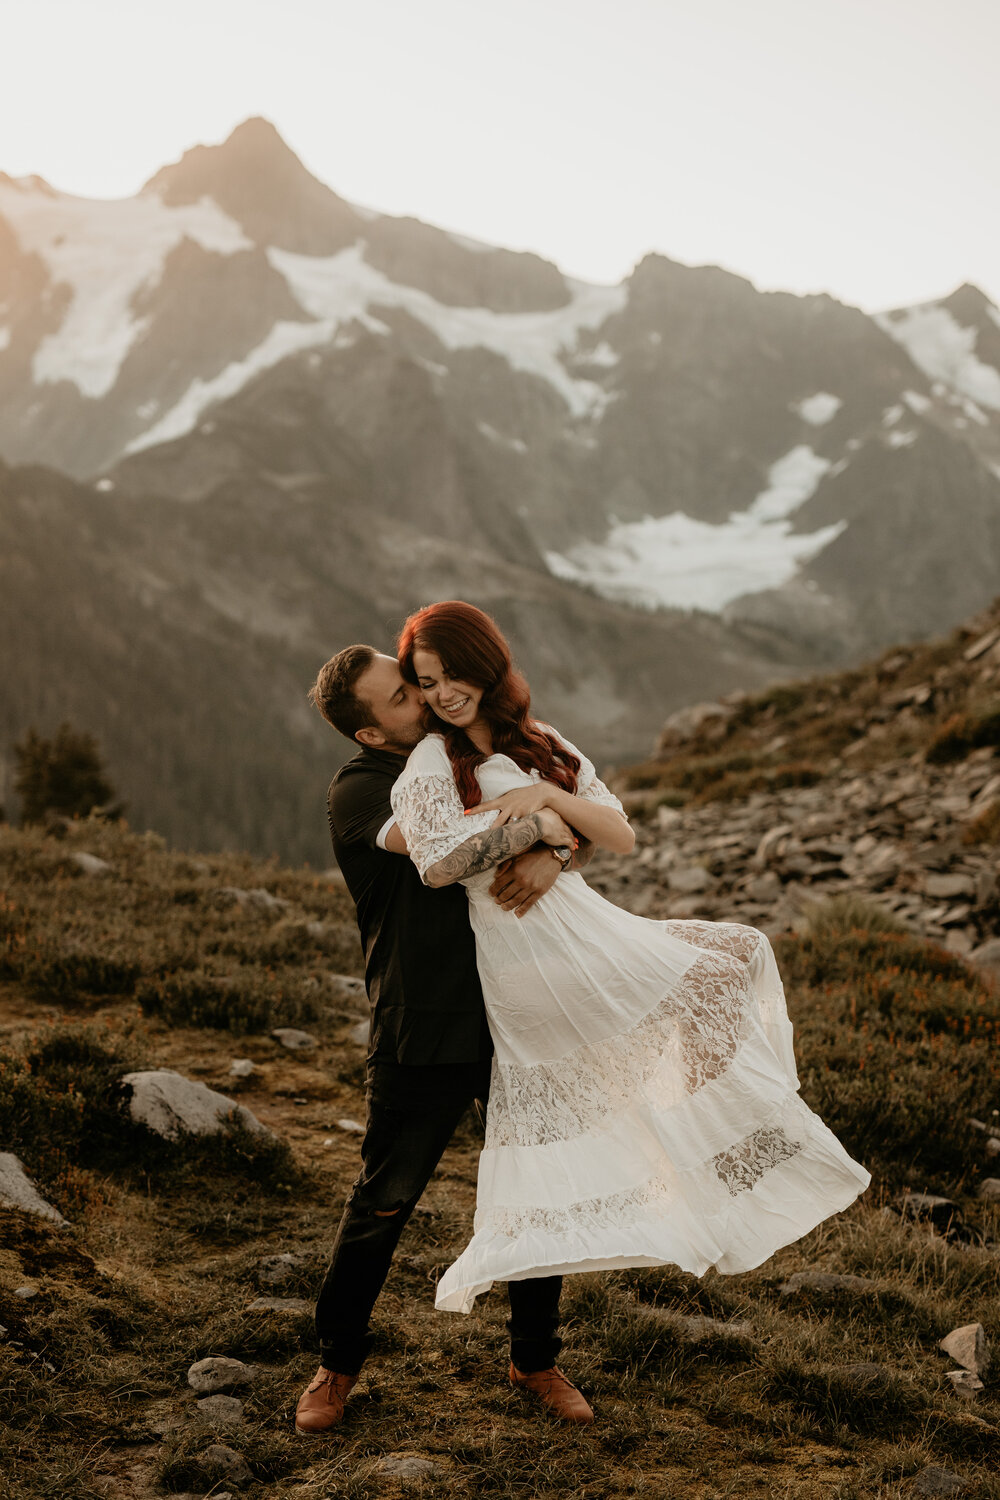 WHere to elope in washington state